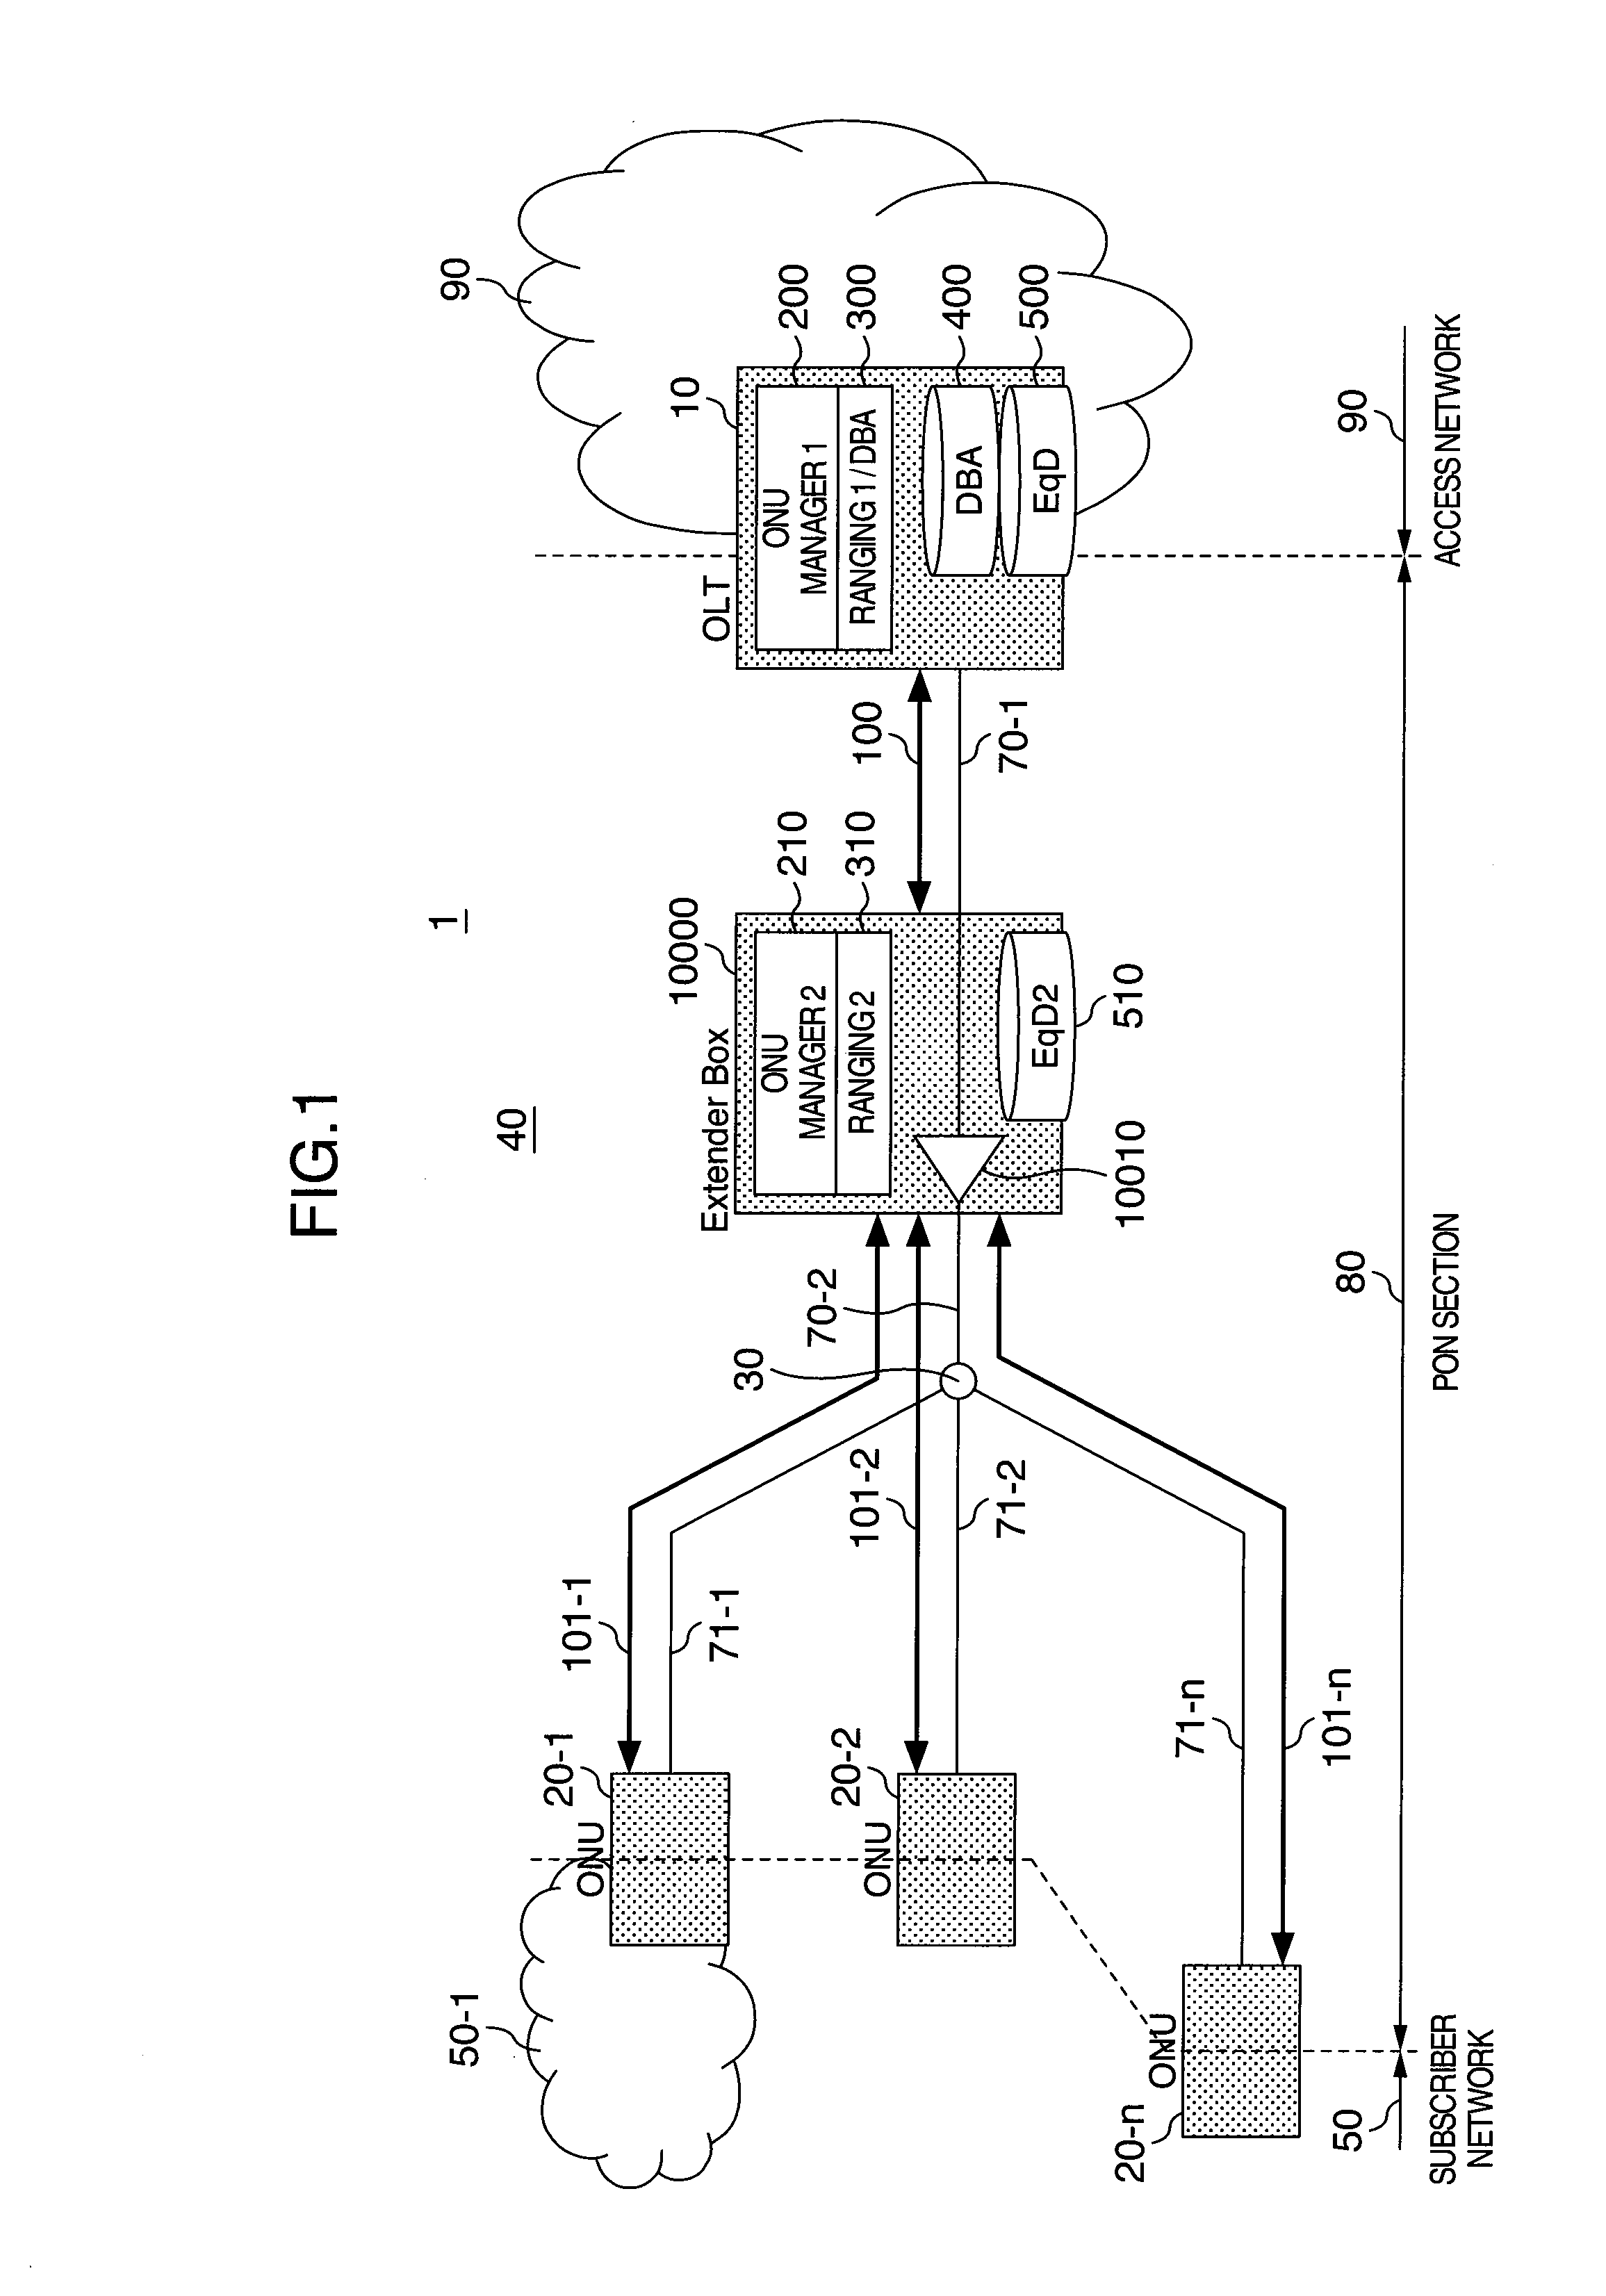 Optical communication system and method for operating the same